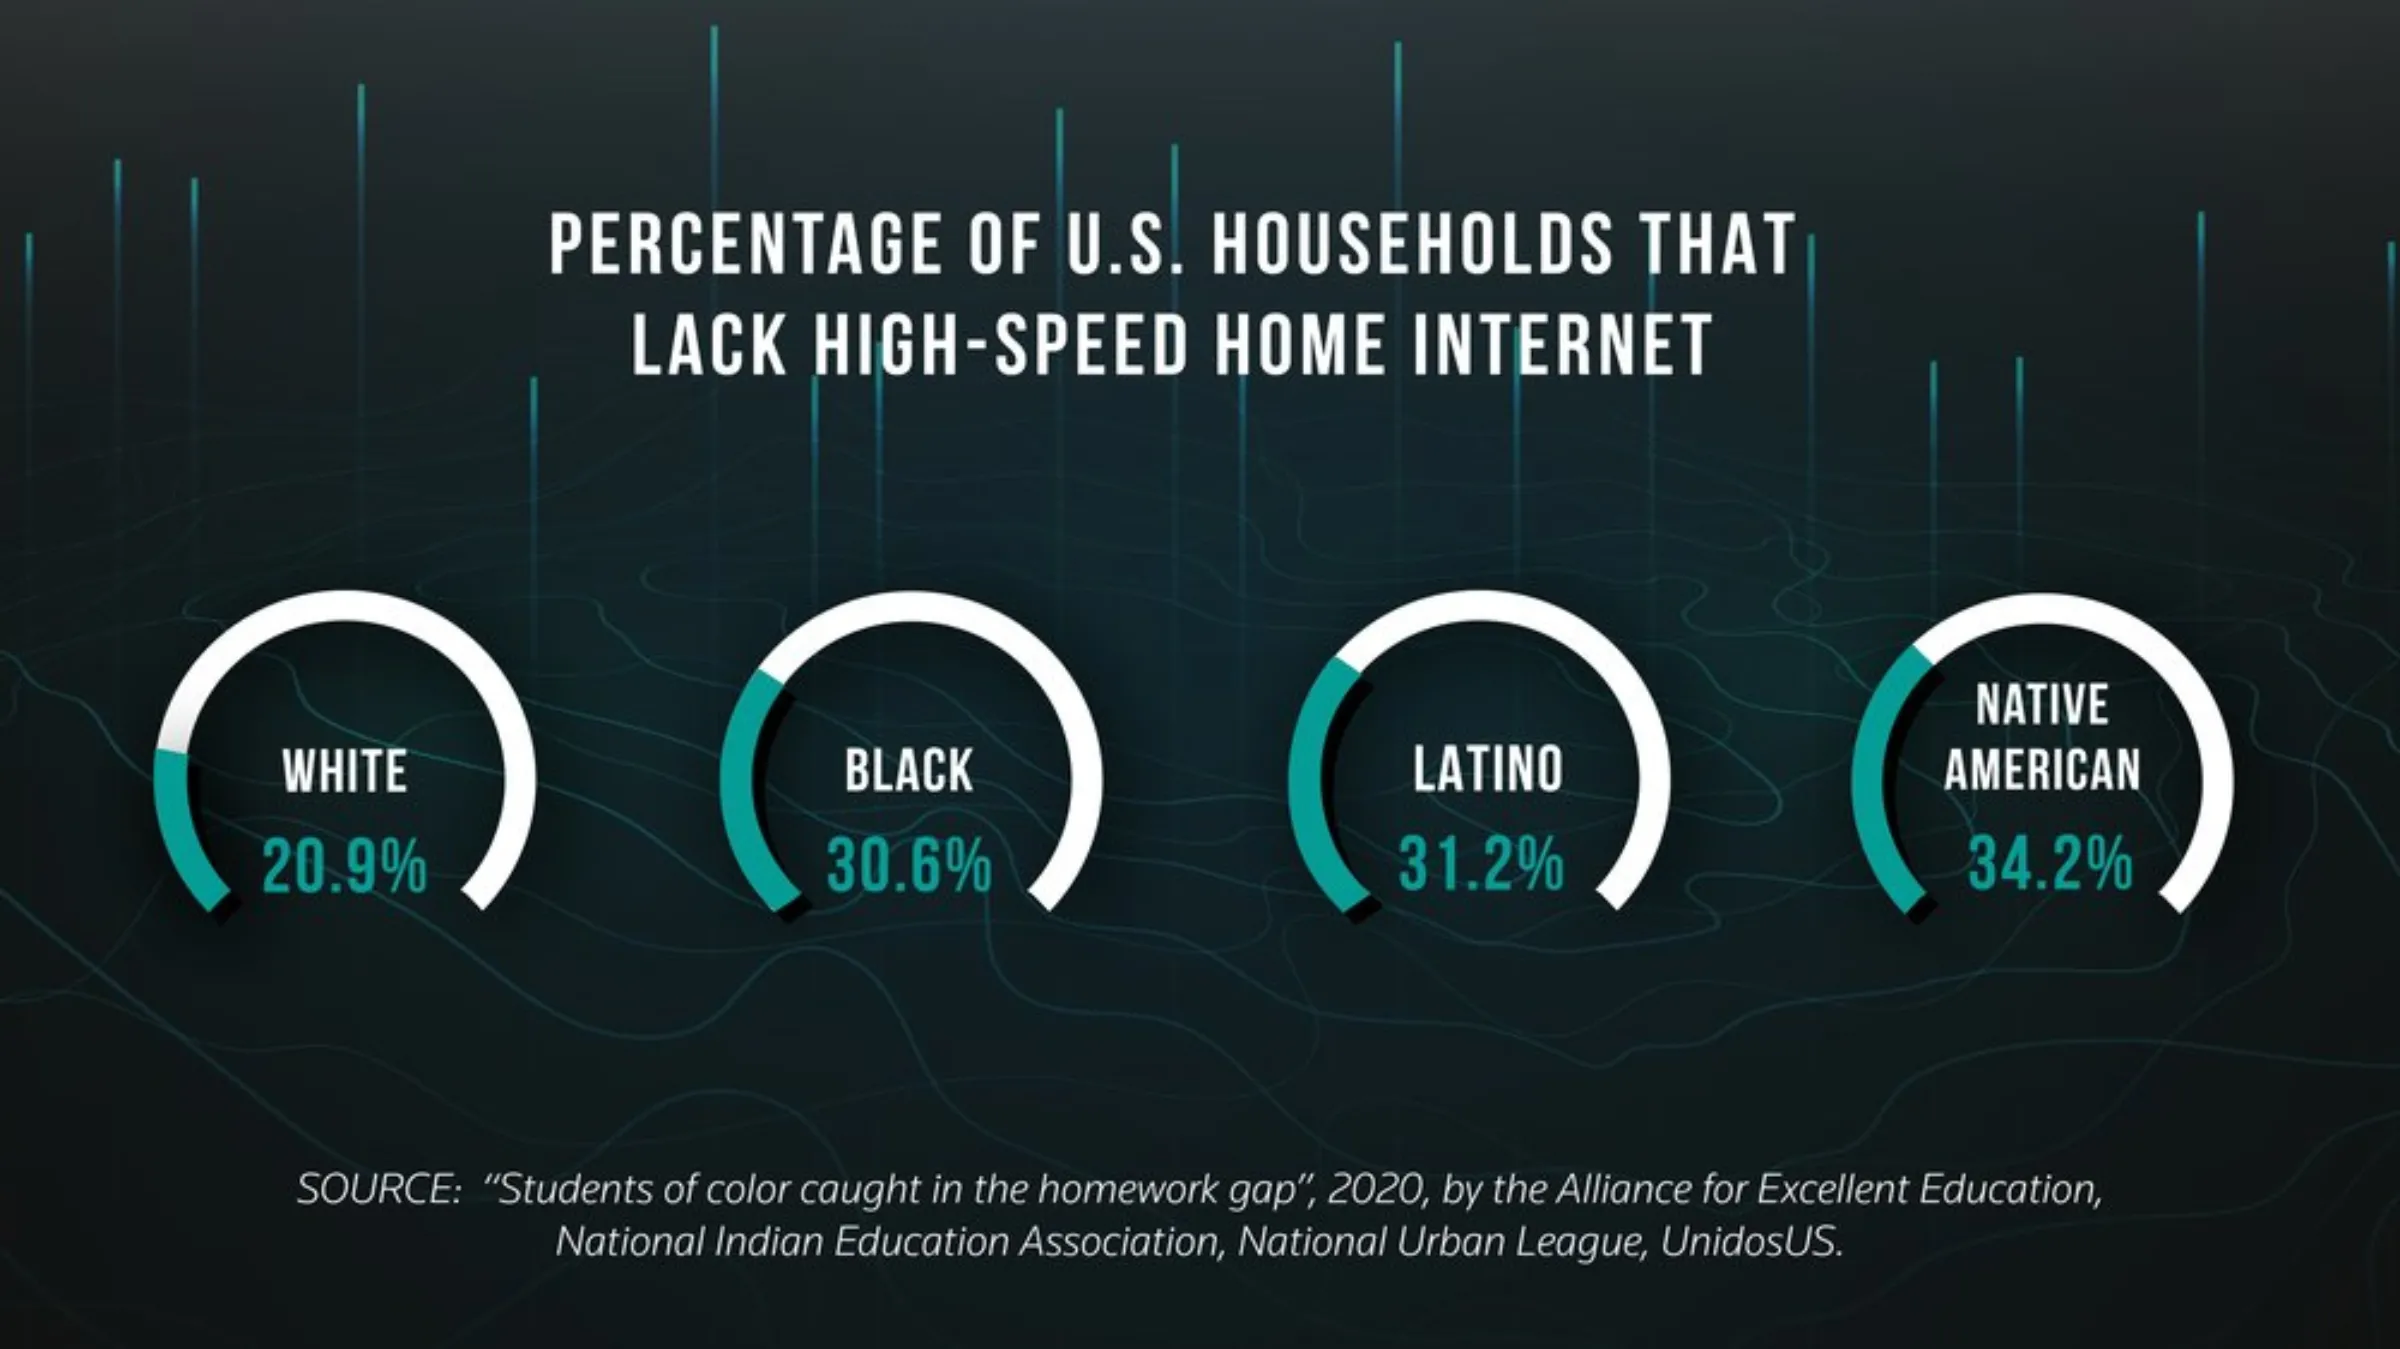 Graph of the percentage of U.S. households that lack high-speed internet